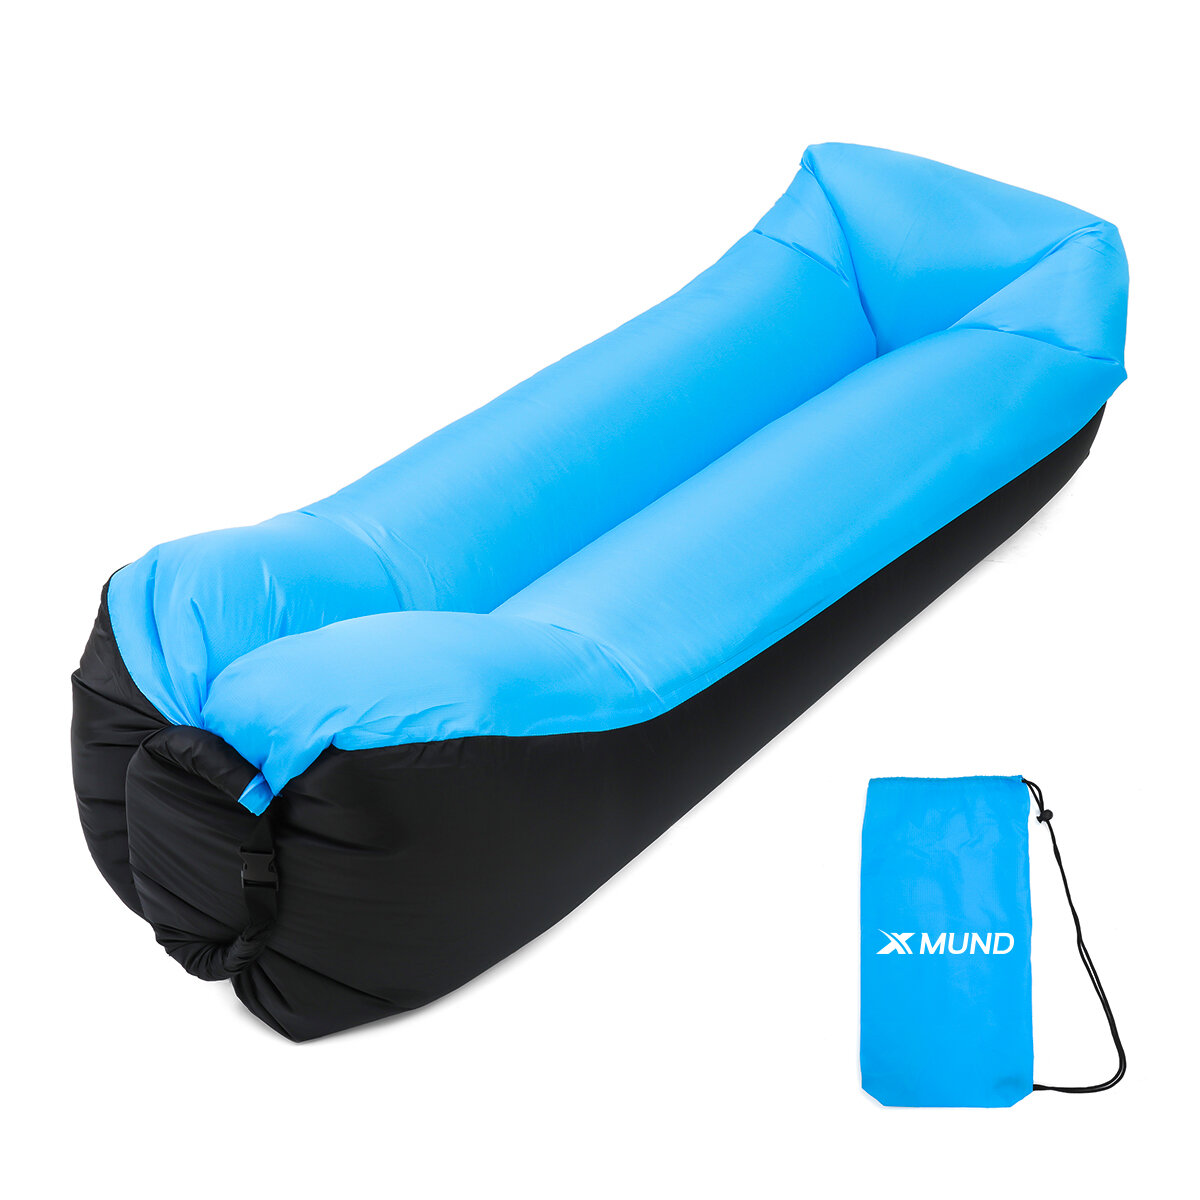 best price,xmund,xd,if1,210t,inflatable,sofa,discount